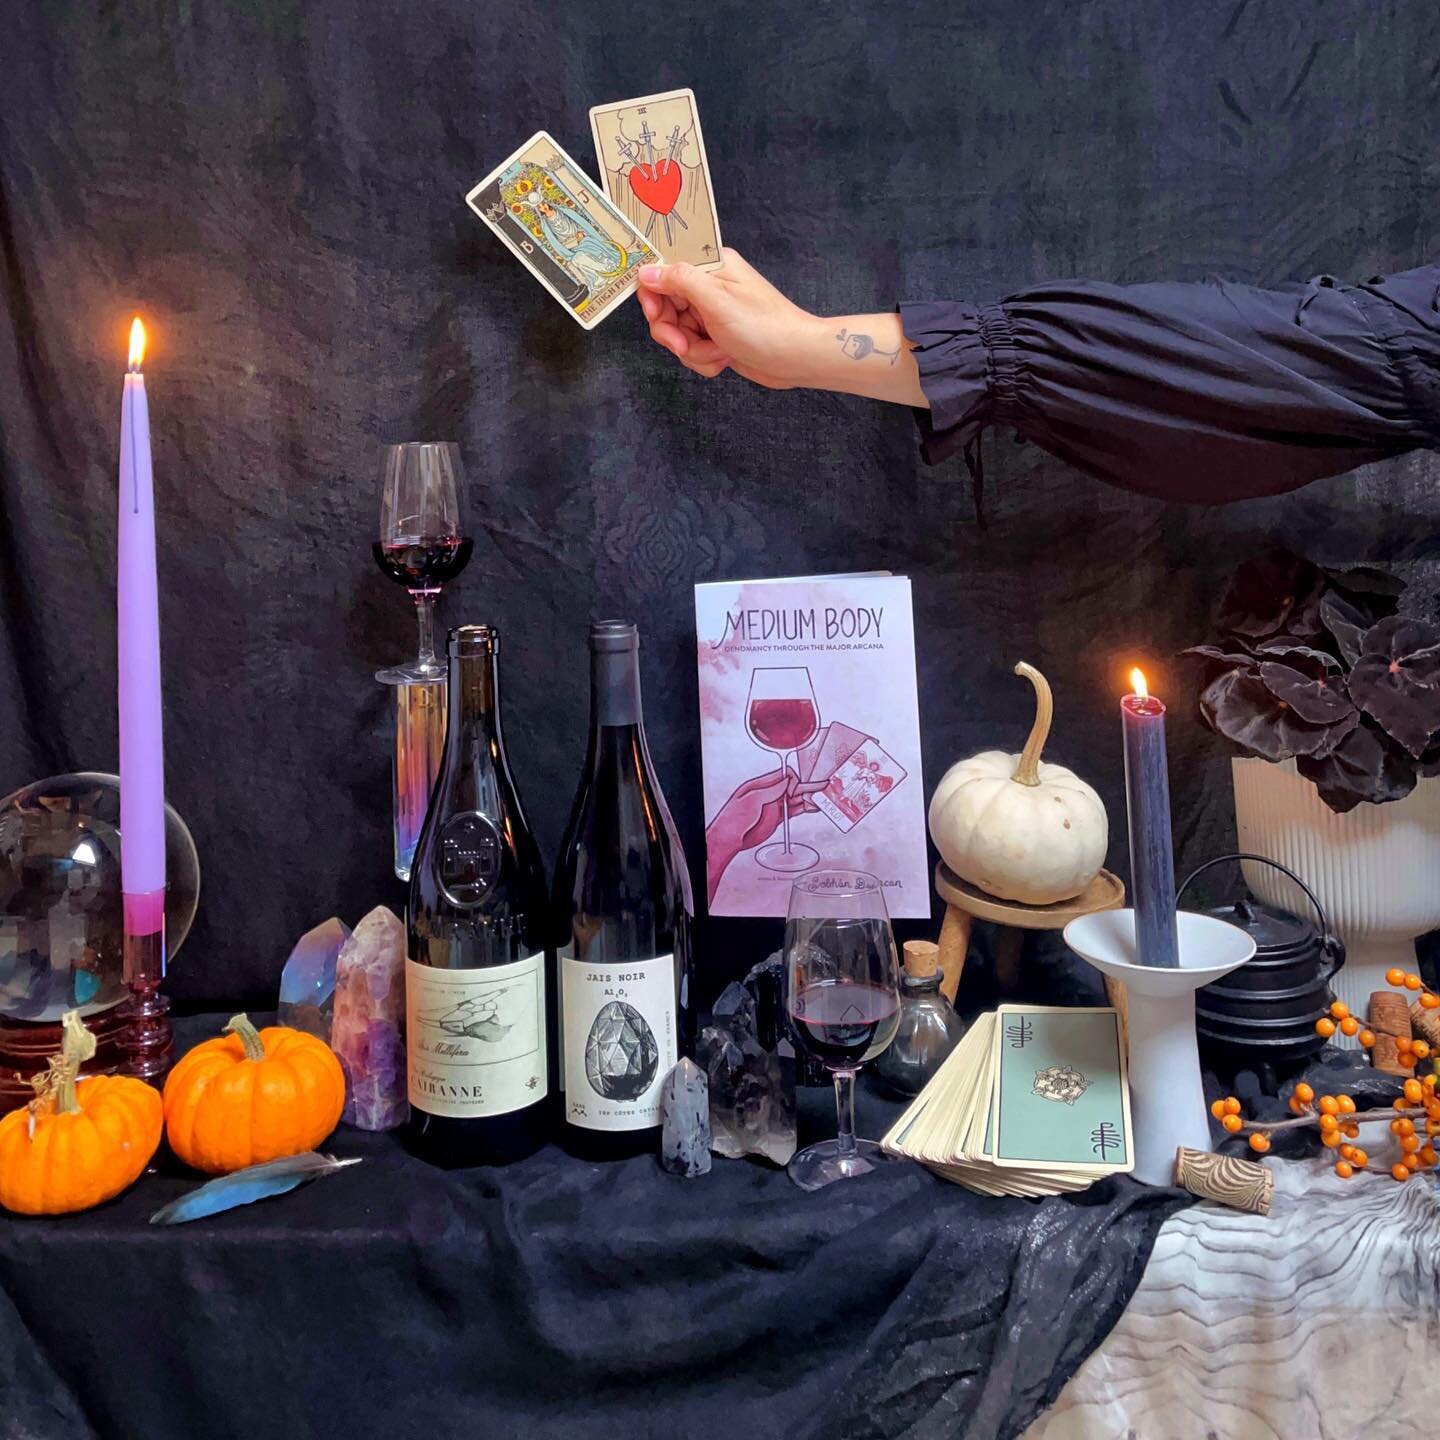 Happy Hallowine! 🎃🍷 These haunting bottles are the 3 of Swords as creepy, cutting Carignan and the High Priestess for a solemn Samhain Syrah blend. Cheers, witches! #oenomancy #hallowine #samhainaltar #witchesofedinburgh #winewitchcraft